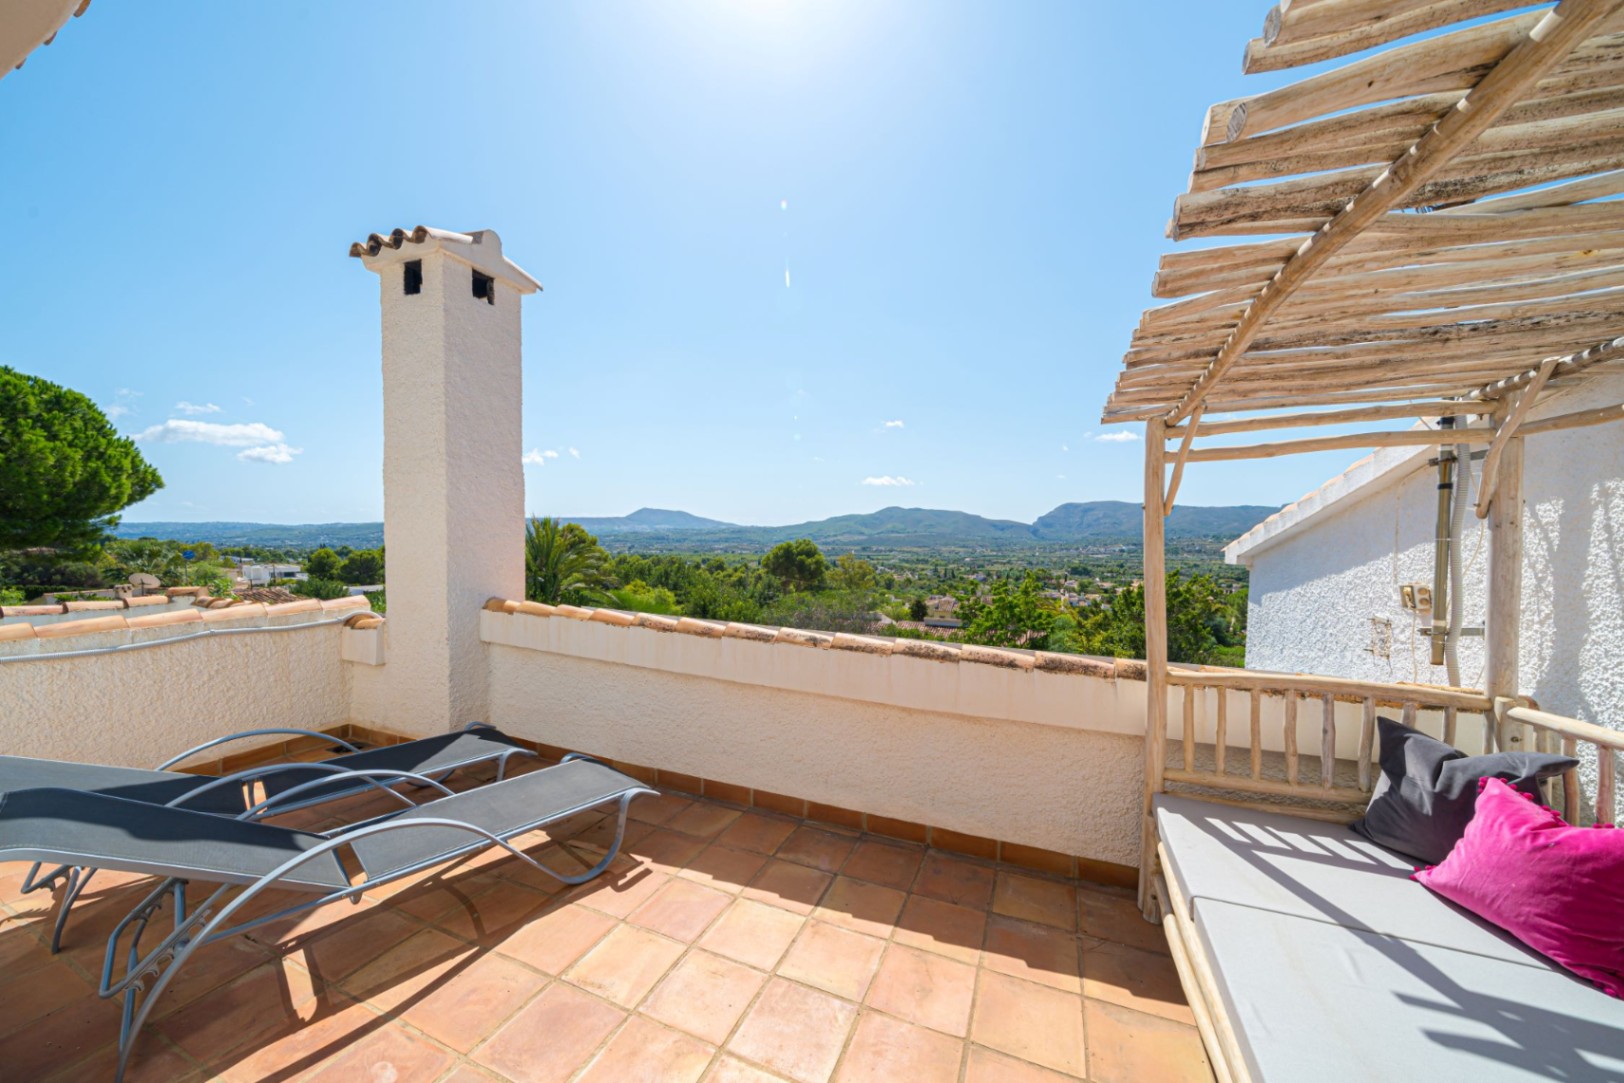 SPACIOUS, PRIVATE VILLA WITH BEAUTIFUL VIEWS ON THE MONTGO